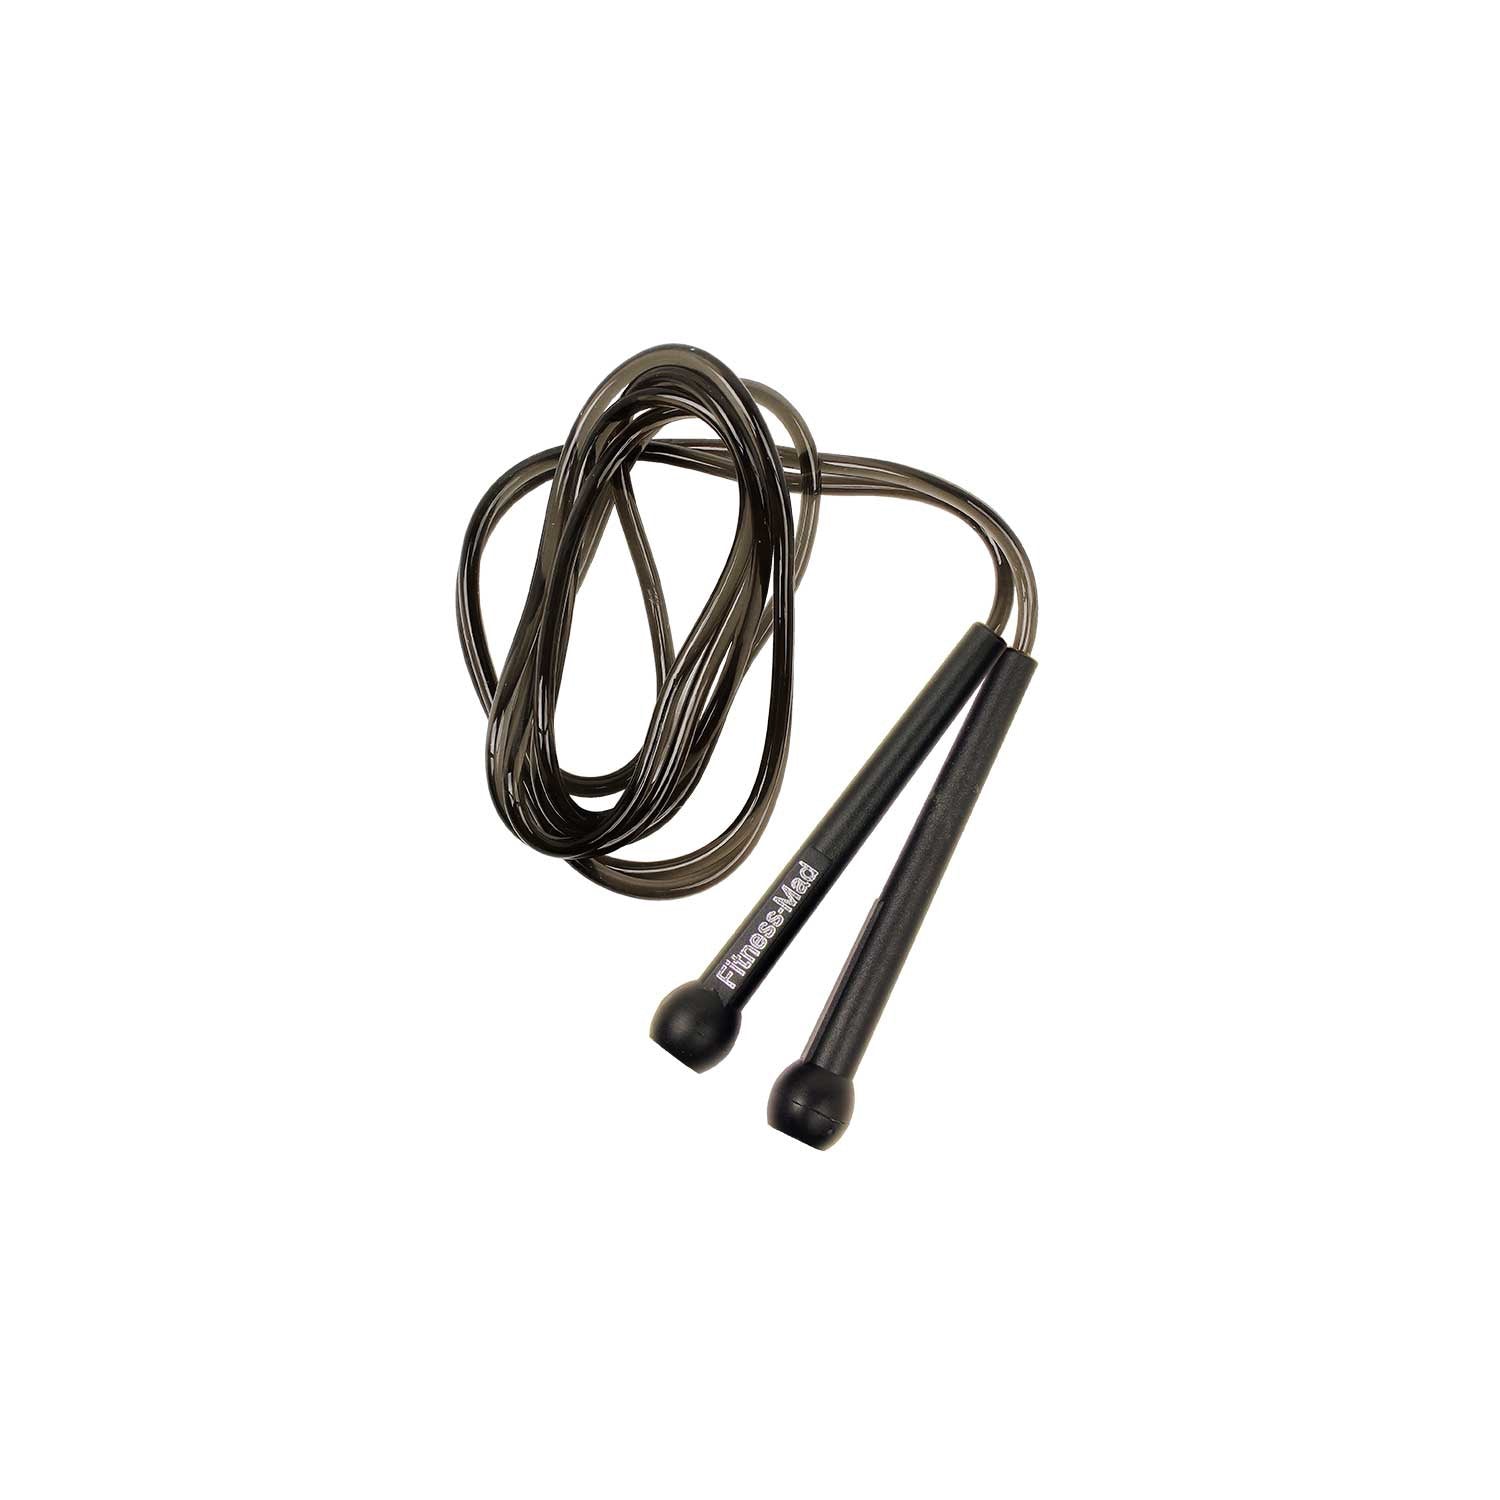 Speed Skipping Rope (Rope Only)